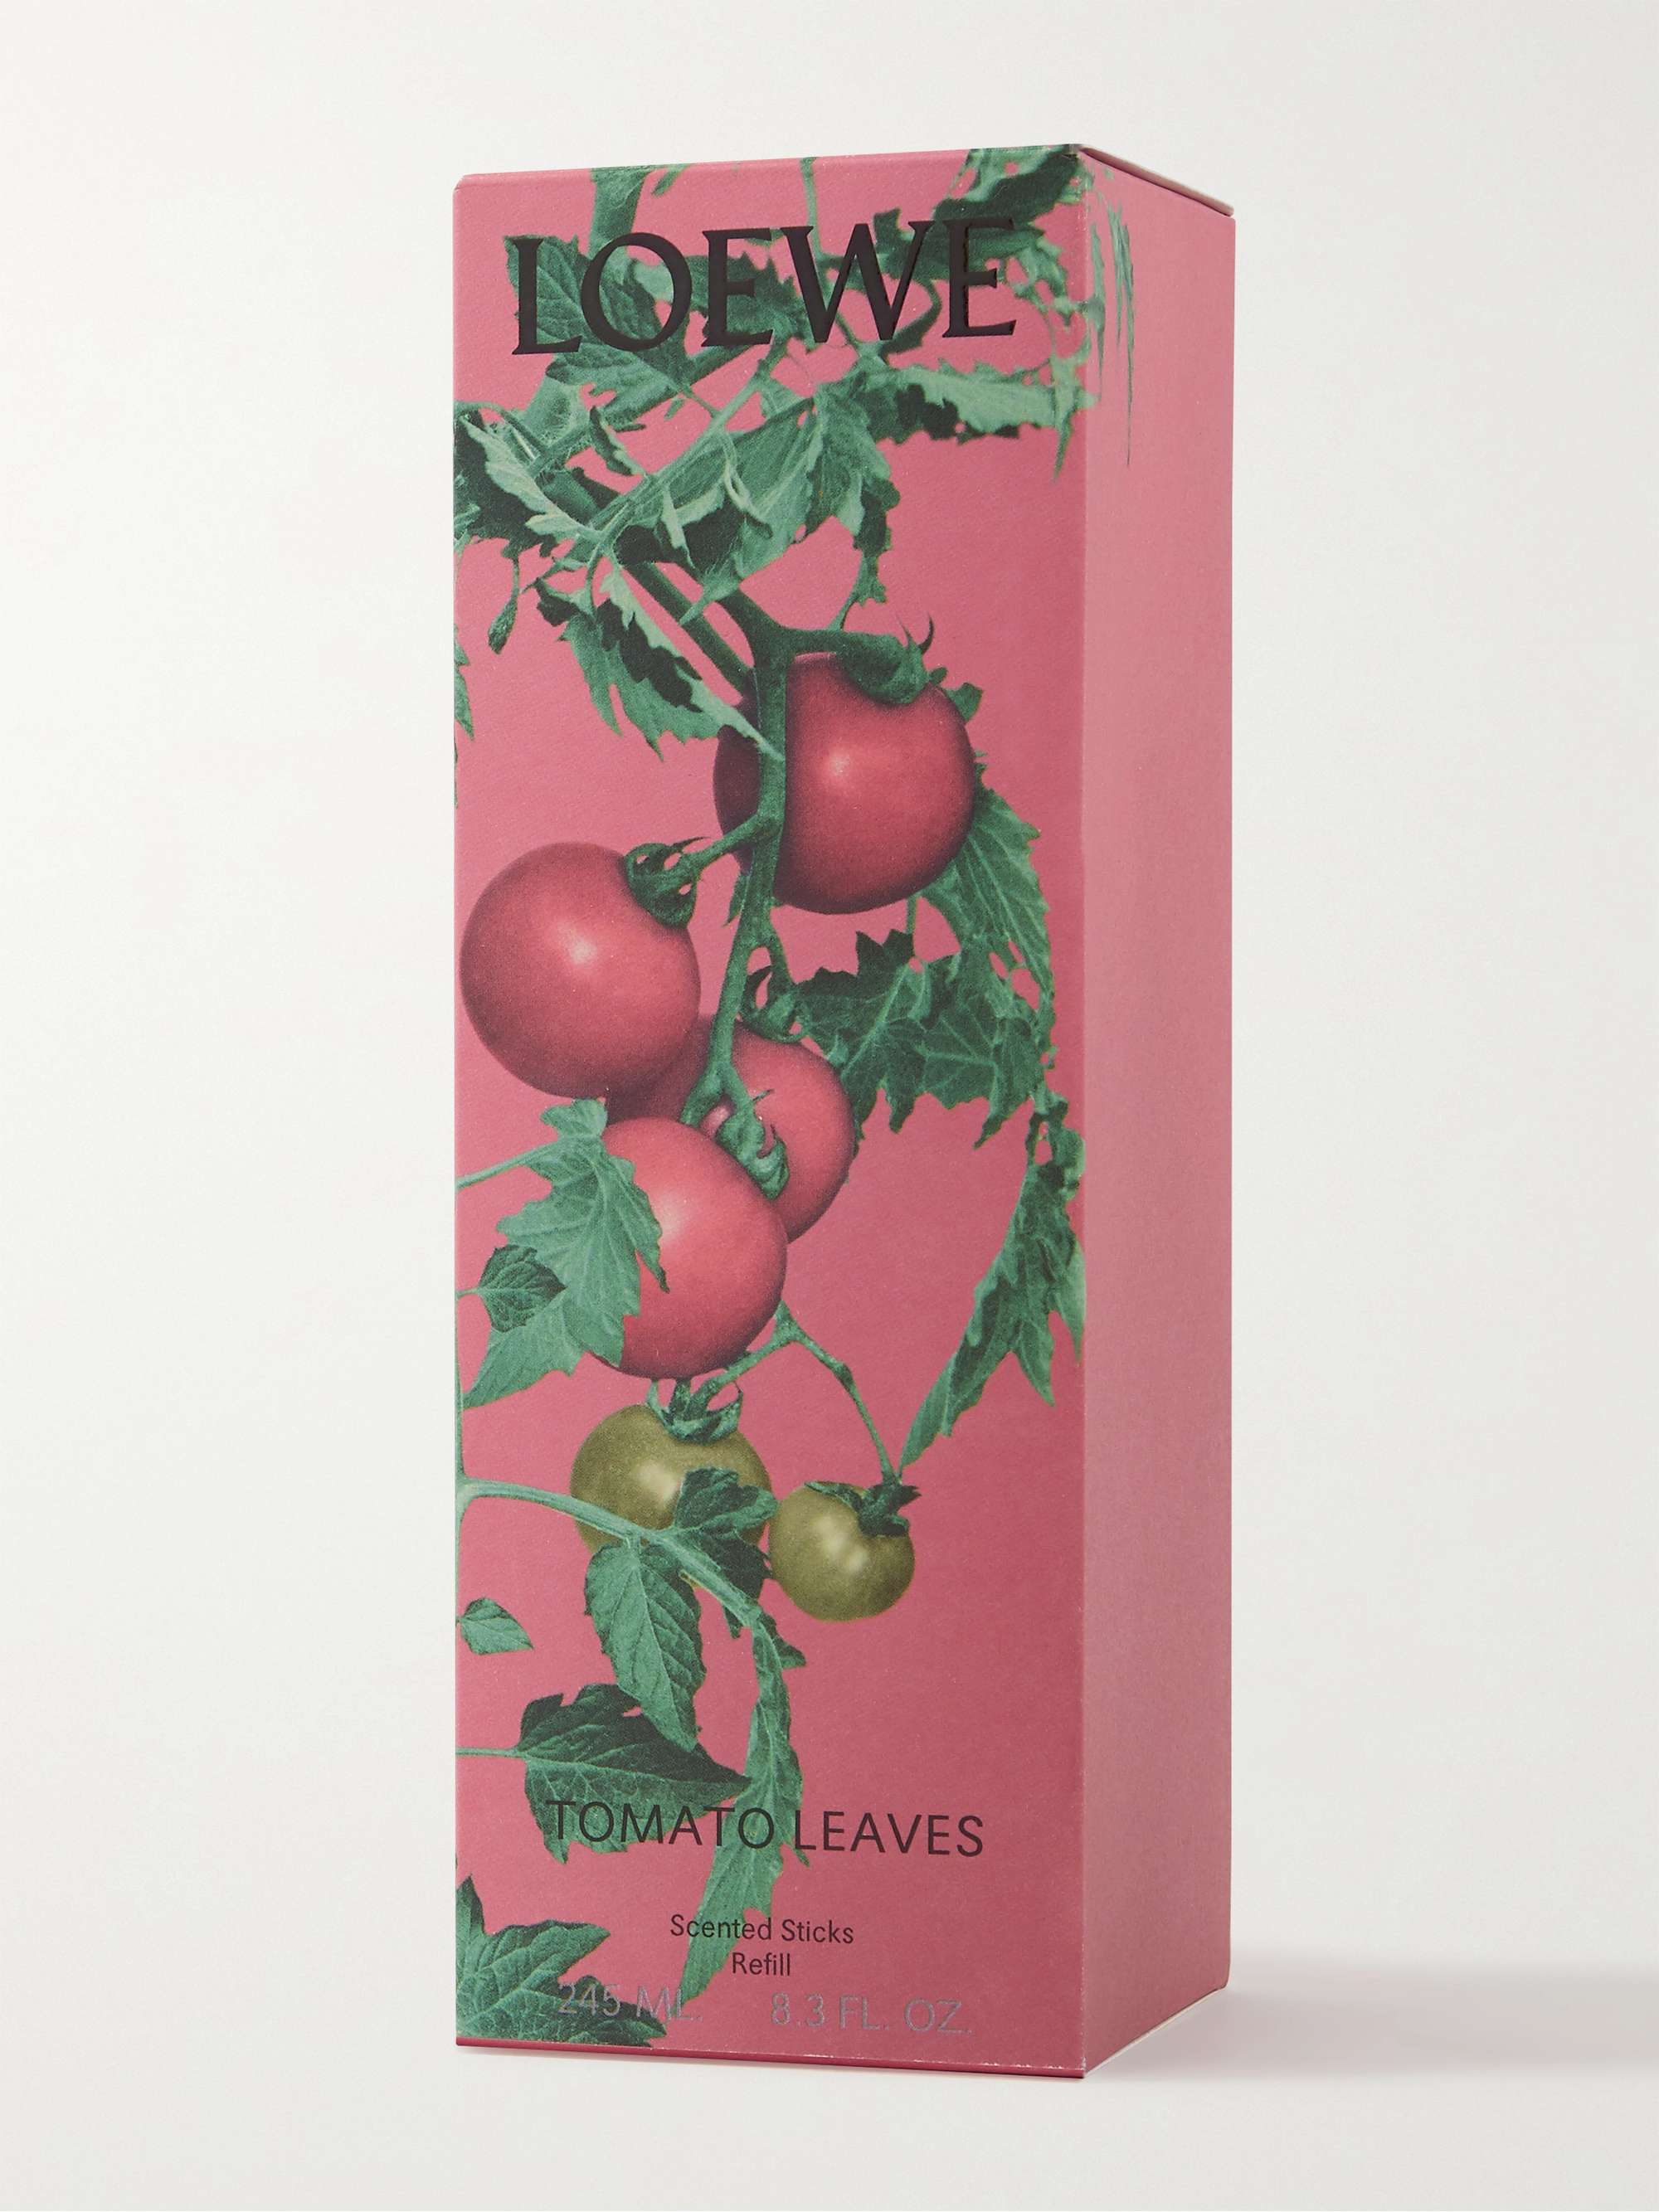 LOEWE HOME SCENTS Tomato Leaves Scent Diffuser, 245ml